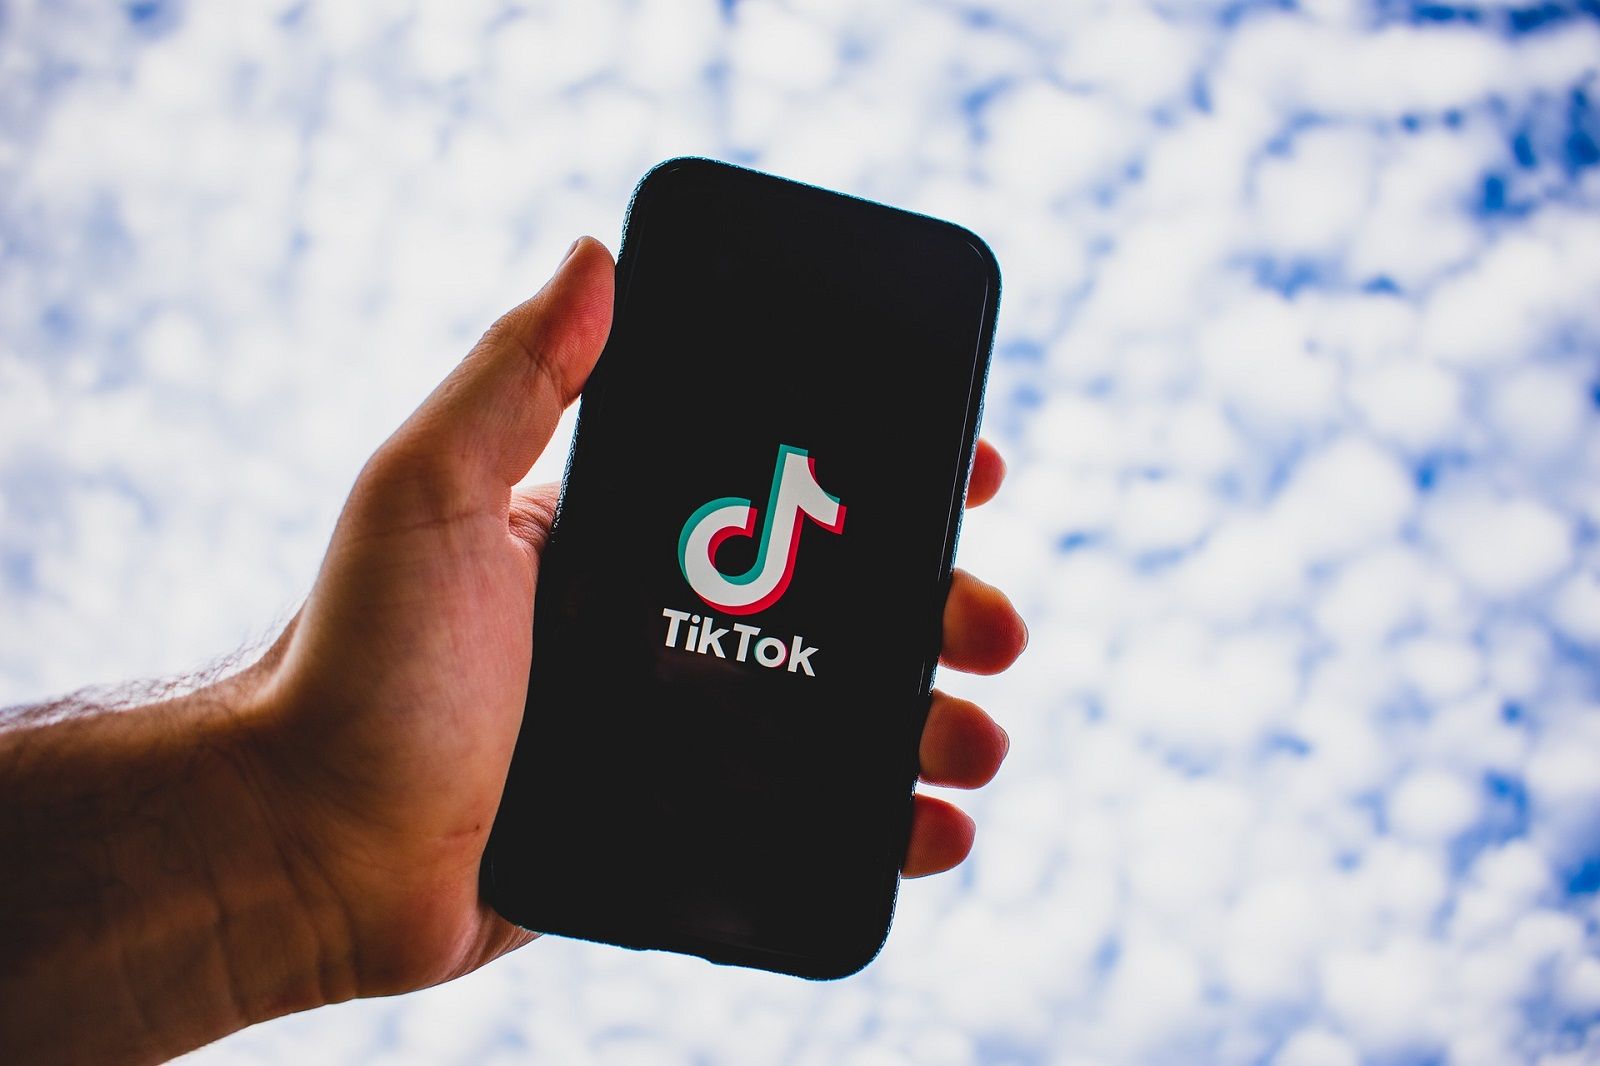 TikTok on a phone with blue sky in the background